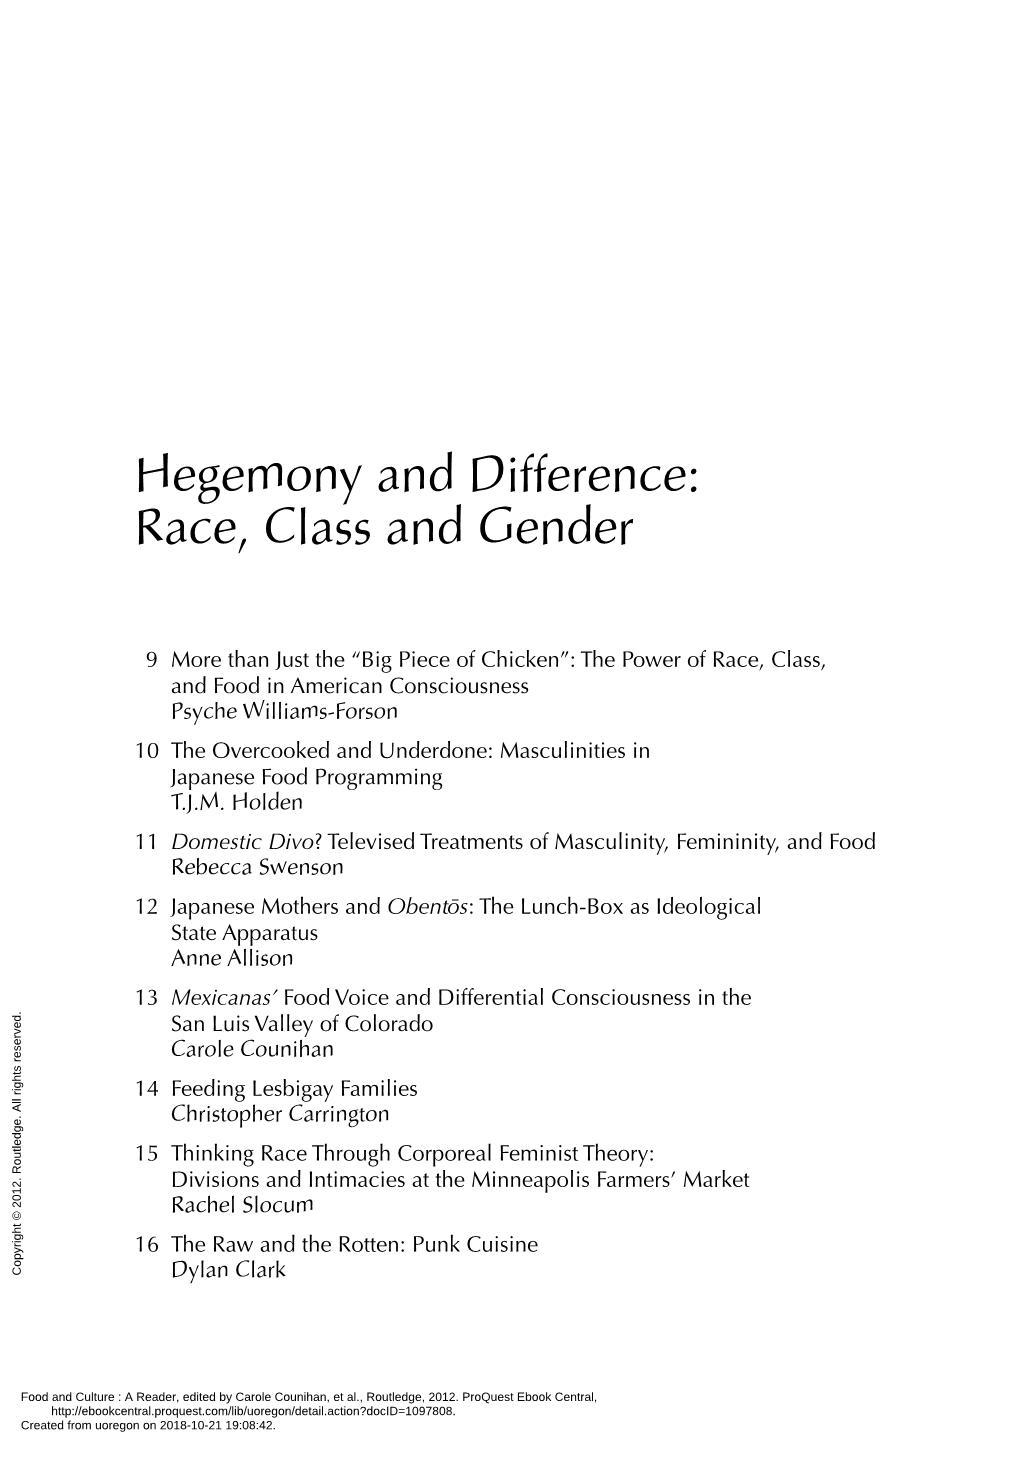 Hegemony and Difference: Race, Class and Gender